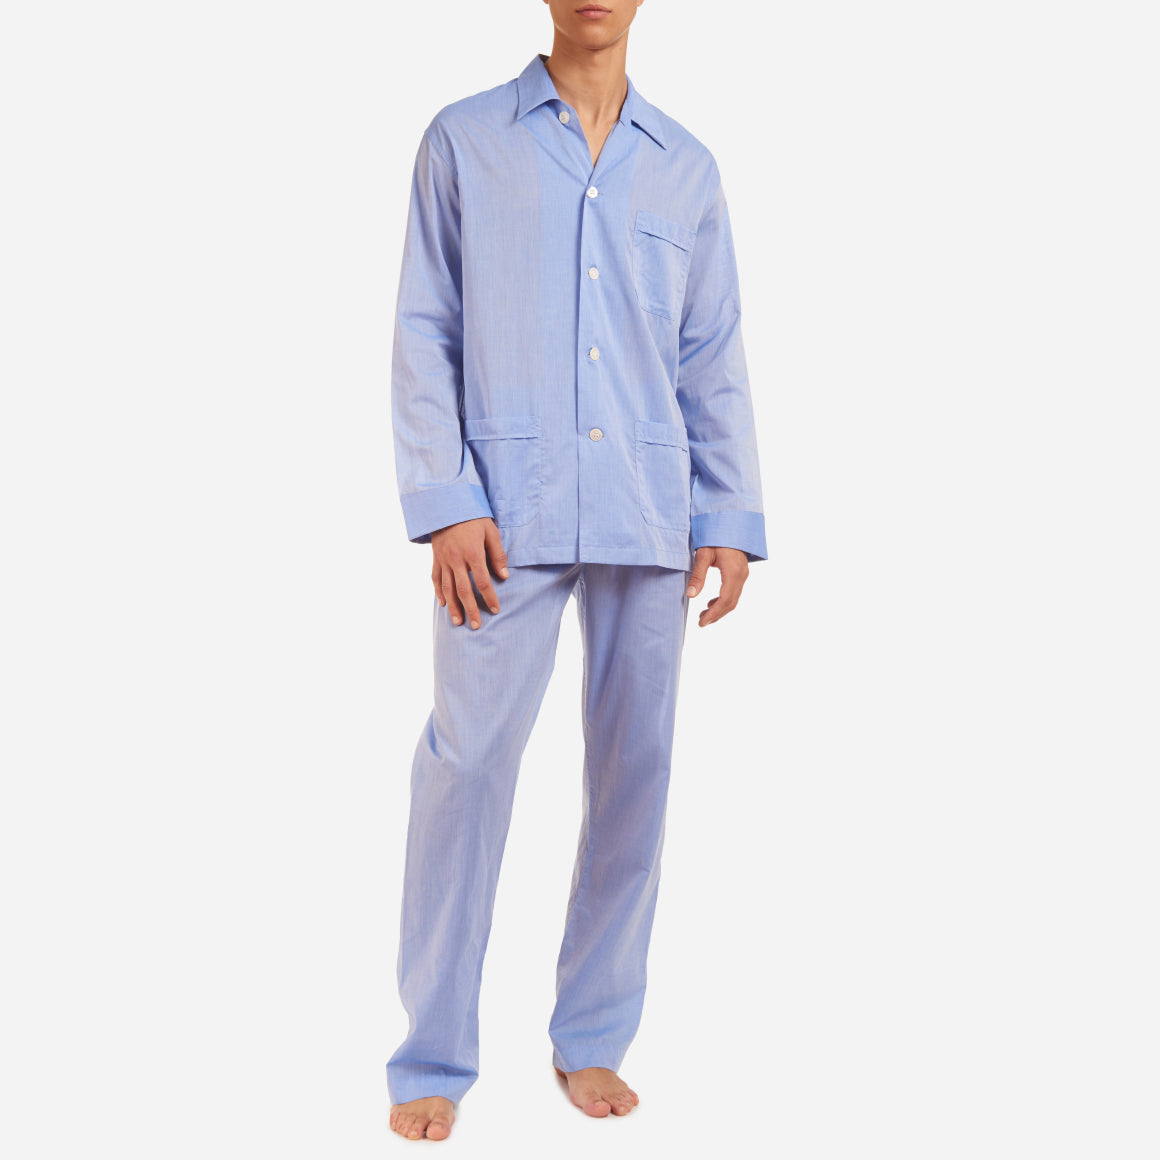 A front-facing model is wearing a long pajama set made of blue cotton batiste fabric.